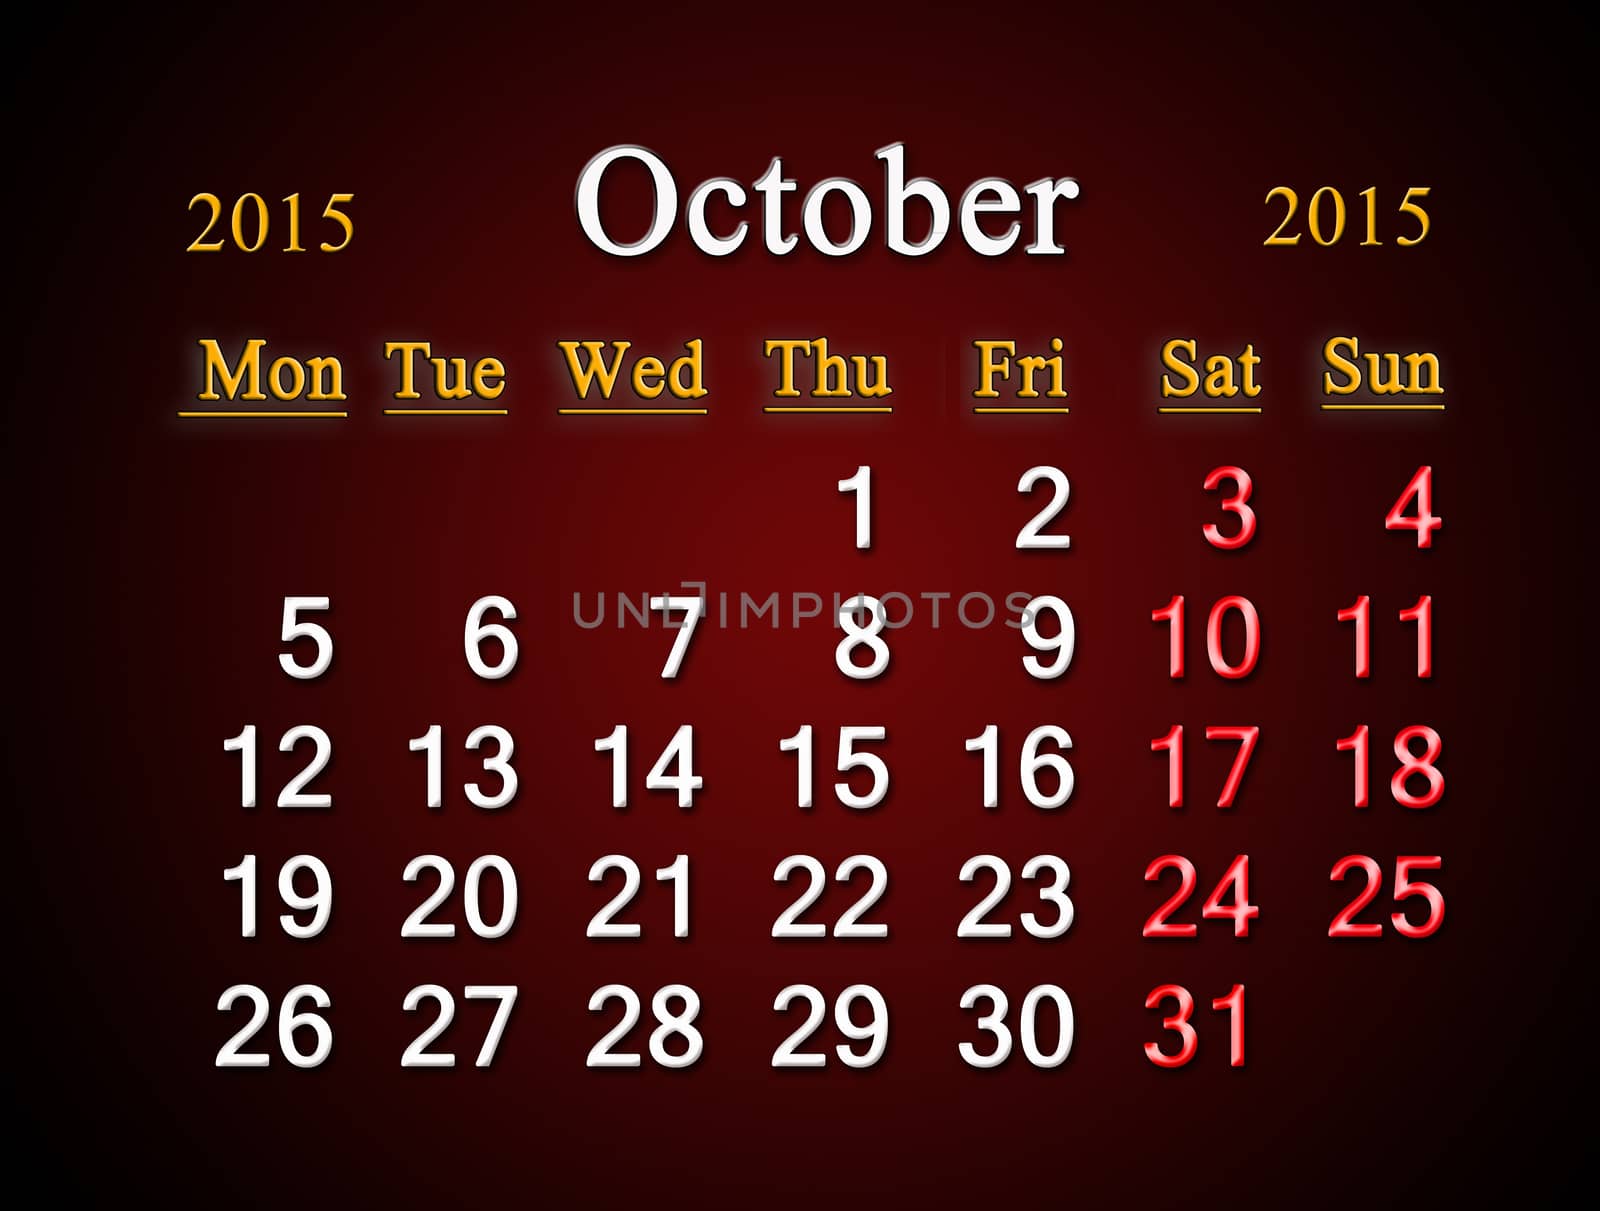 calendar on October of 2015 year on claret by alexmak